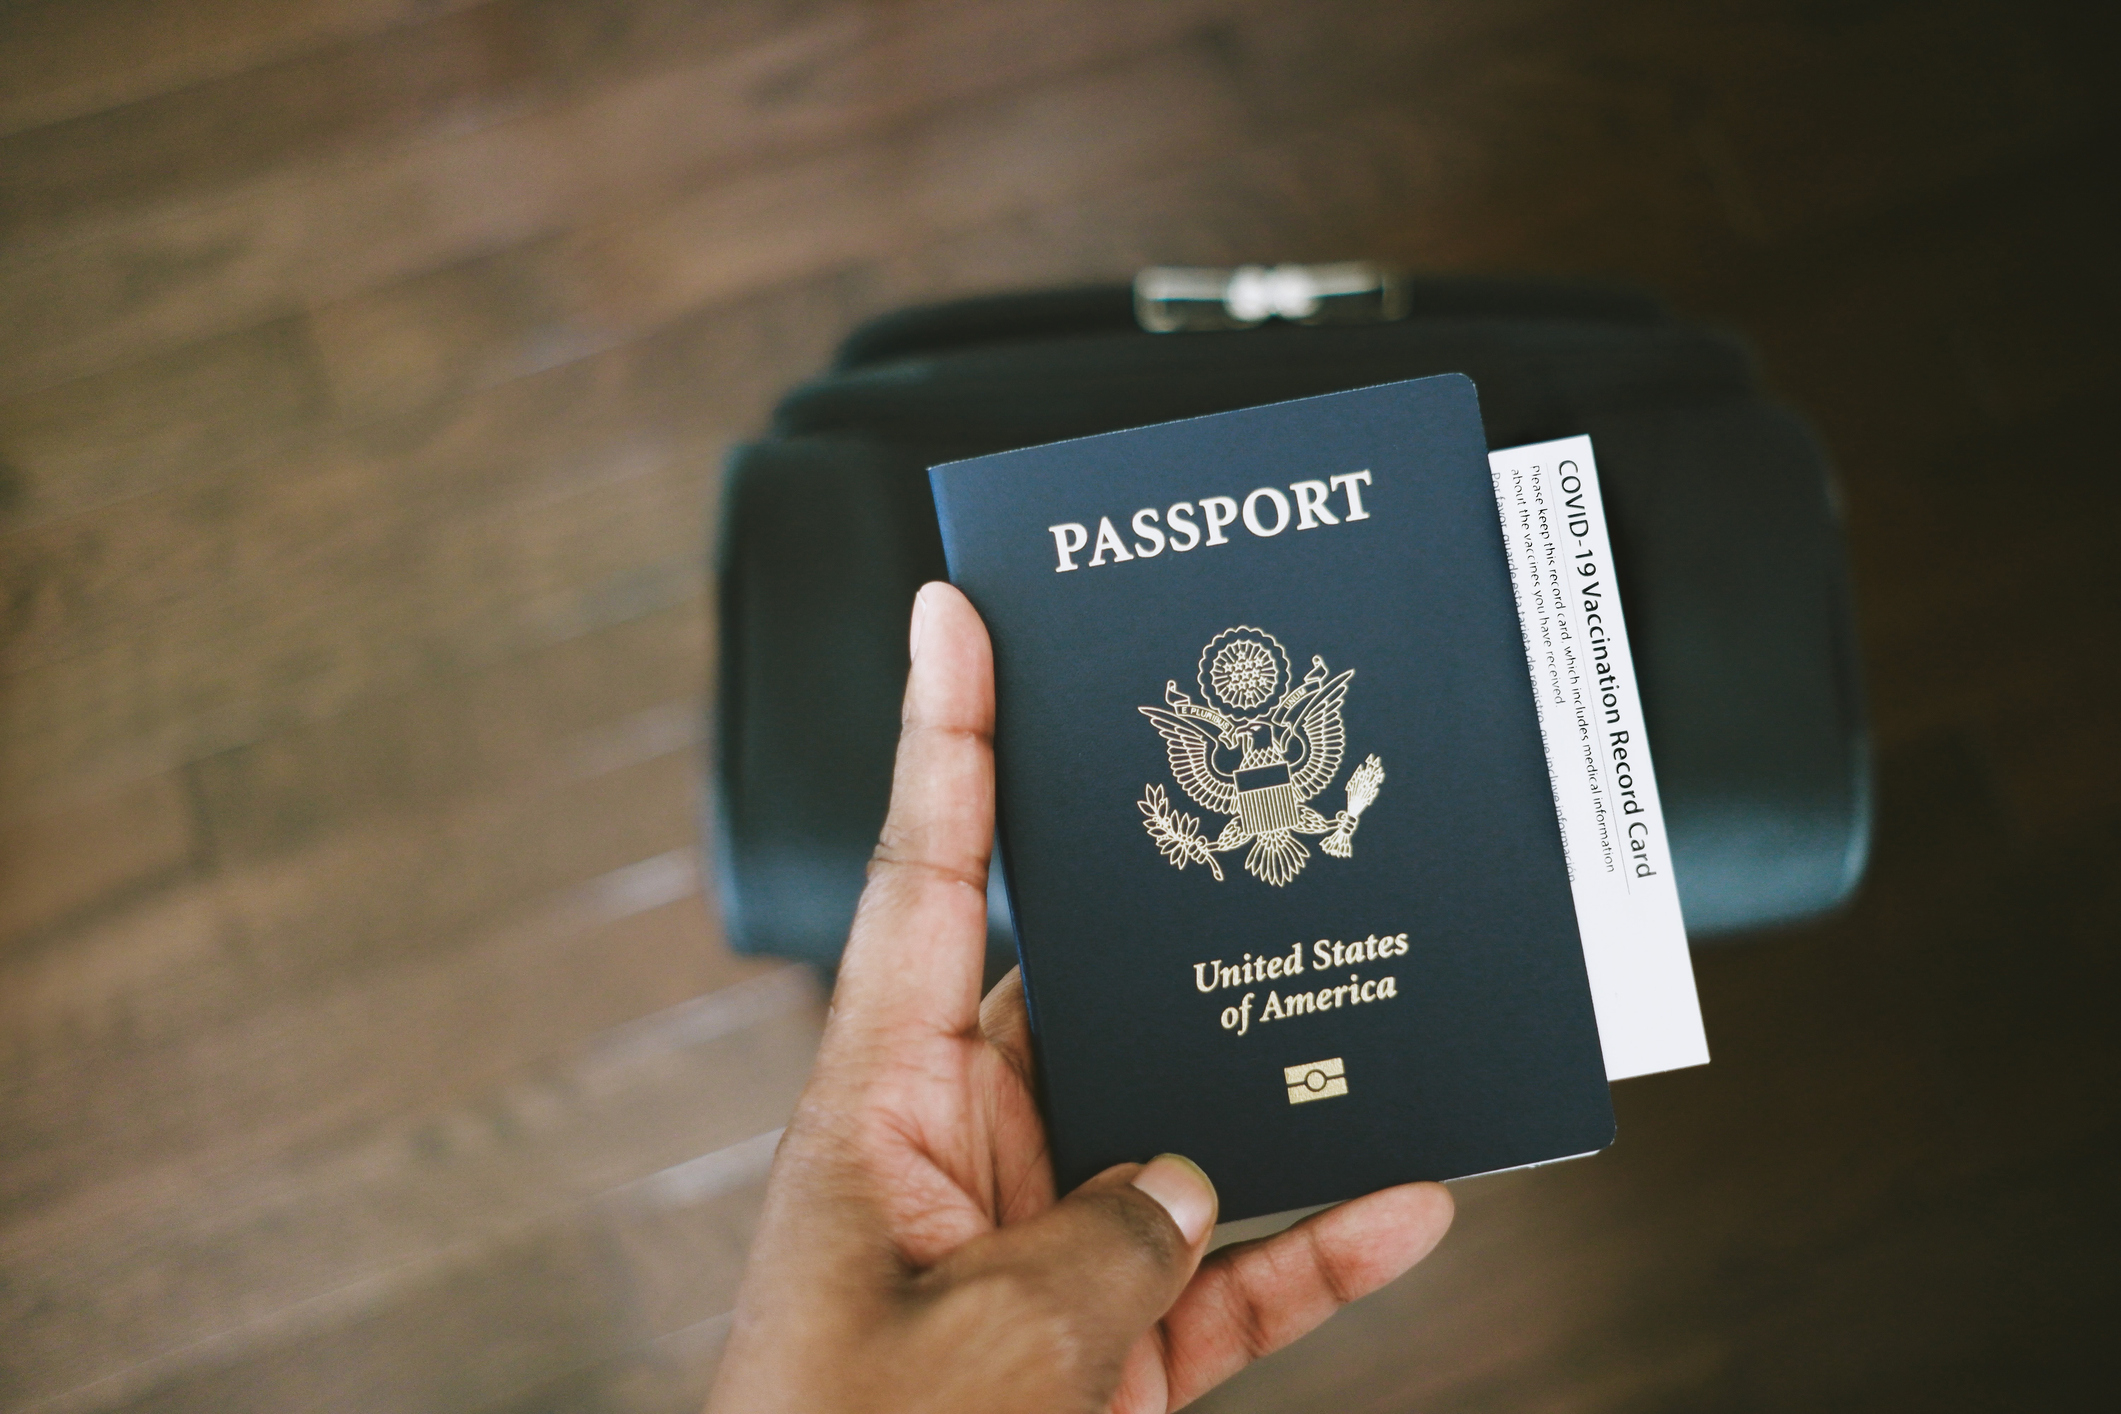 Hand holding a US passport over a suitcase, suggesting travel preparation